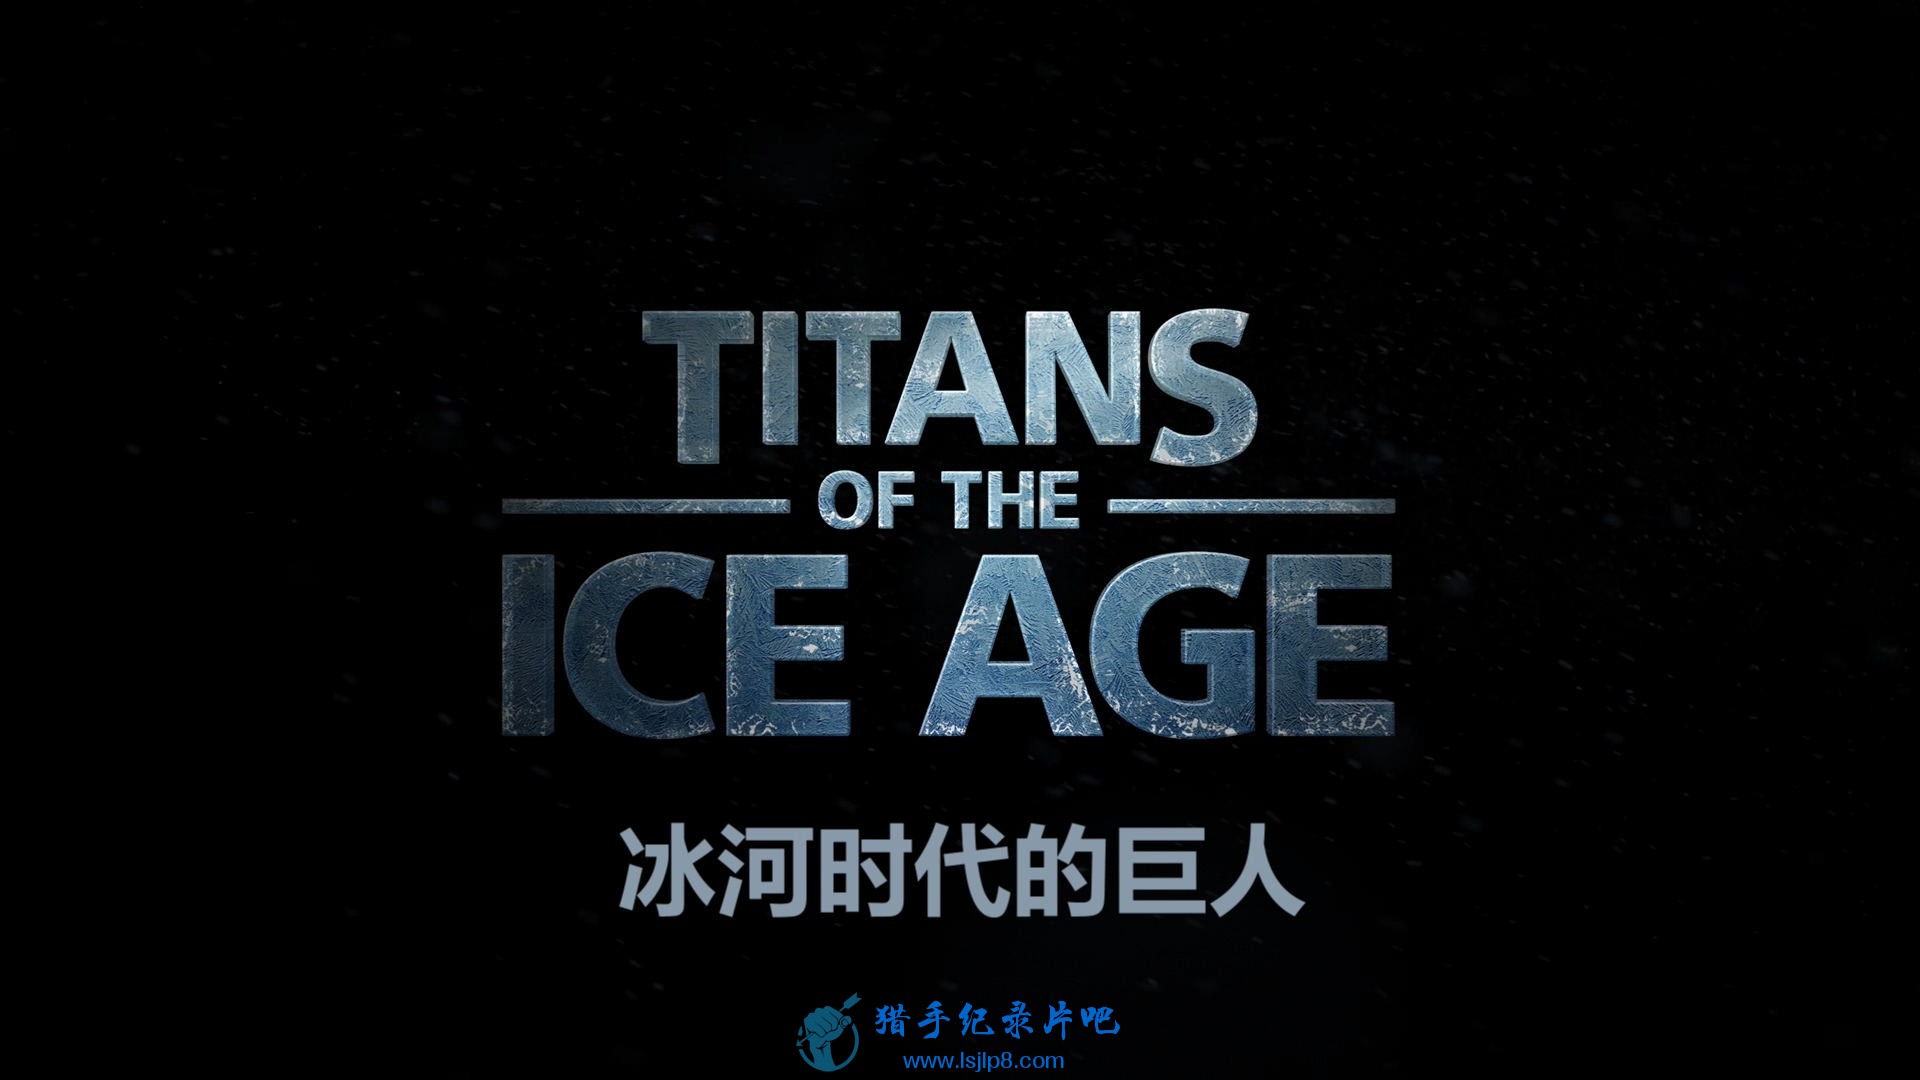 Titans.of.the.Ice.Age.2013.1080p.BluRay.x264.DTS-SWTYBLZ.mkv_20200613_101050.560.jpg